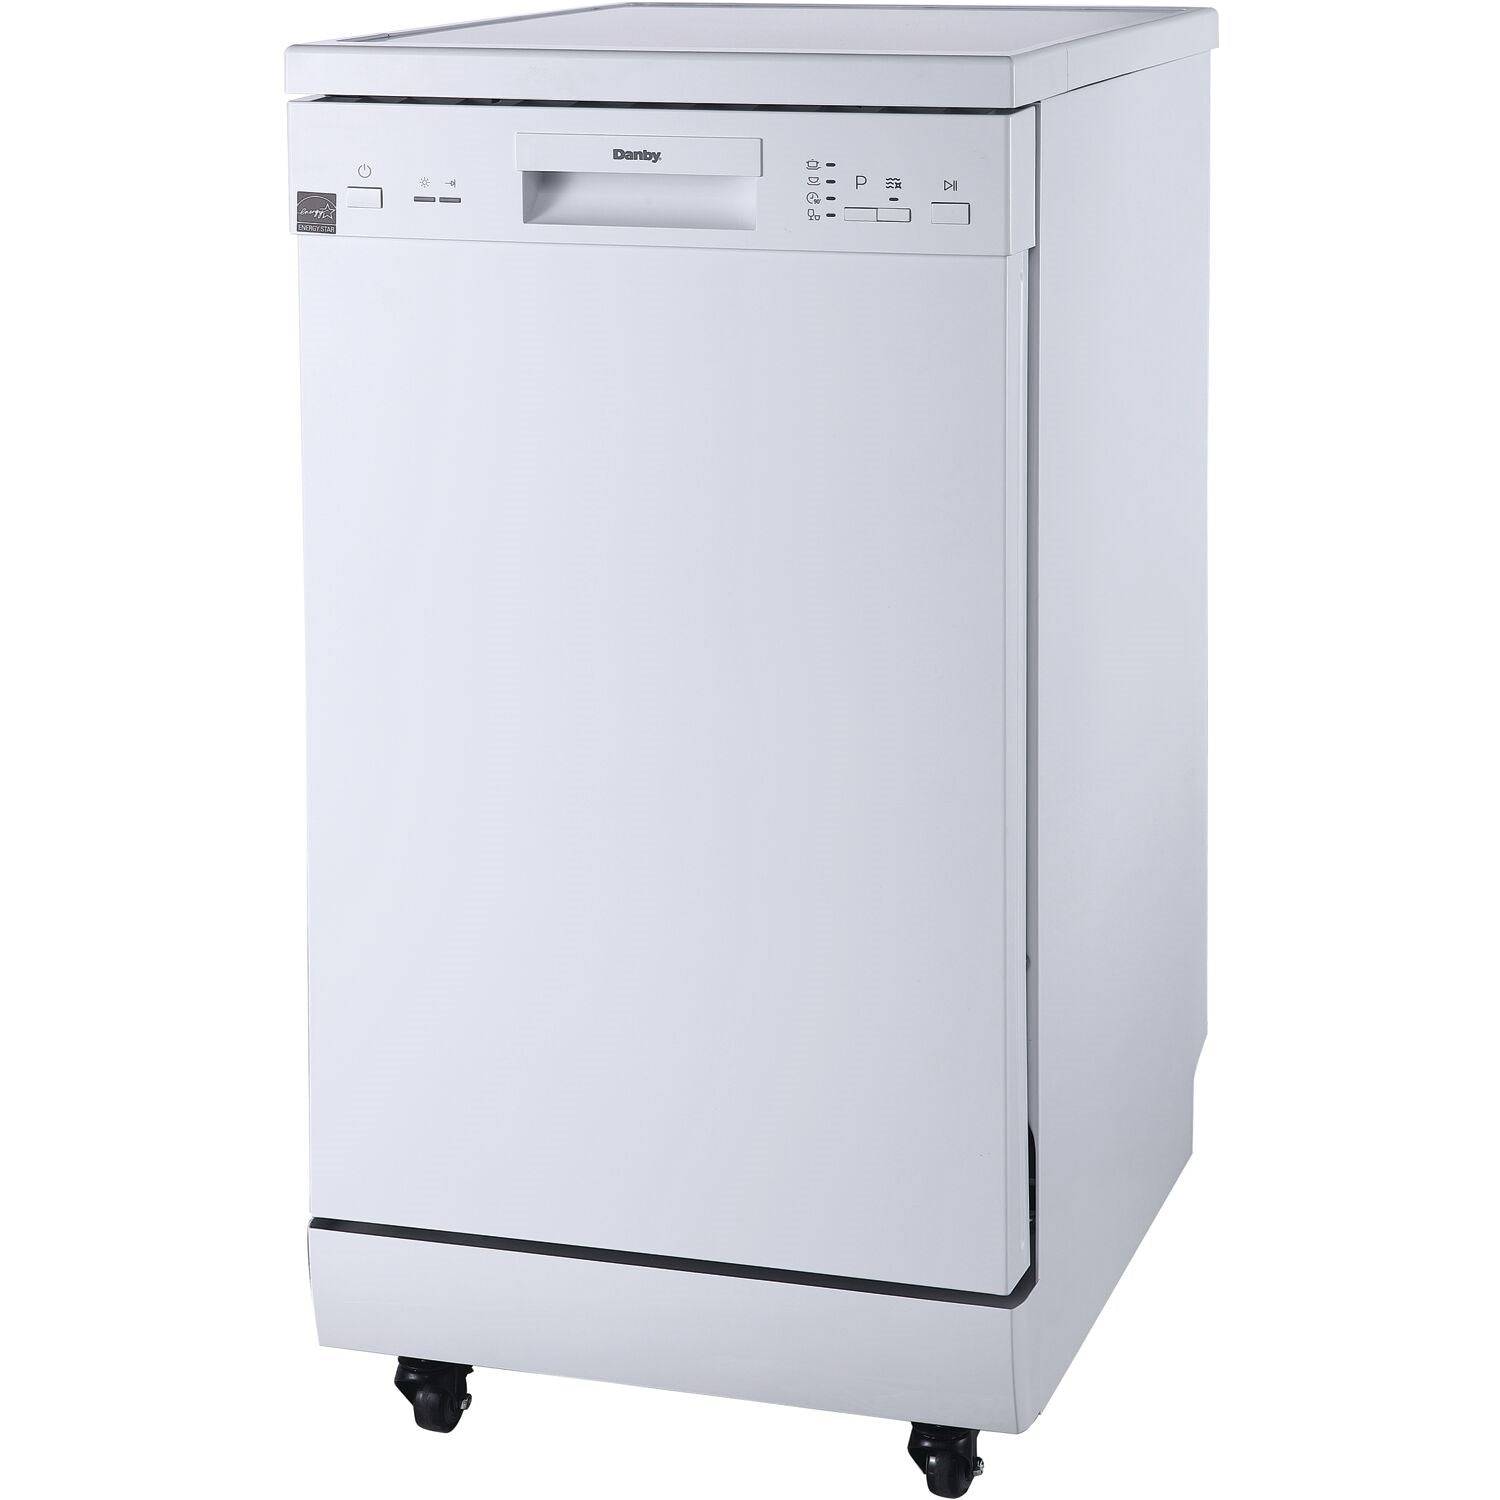 Danby - 18 inch Portable Dishwasher, 8 Place Settings, SS Interior, 4 Wash Programs